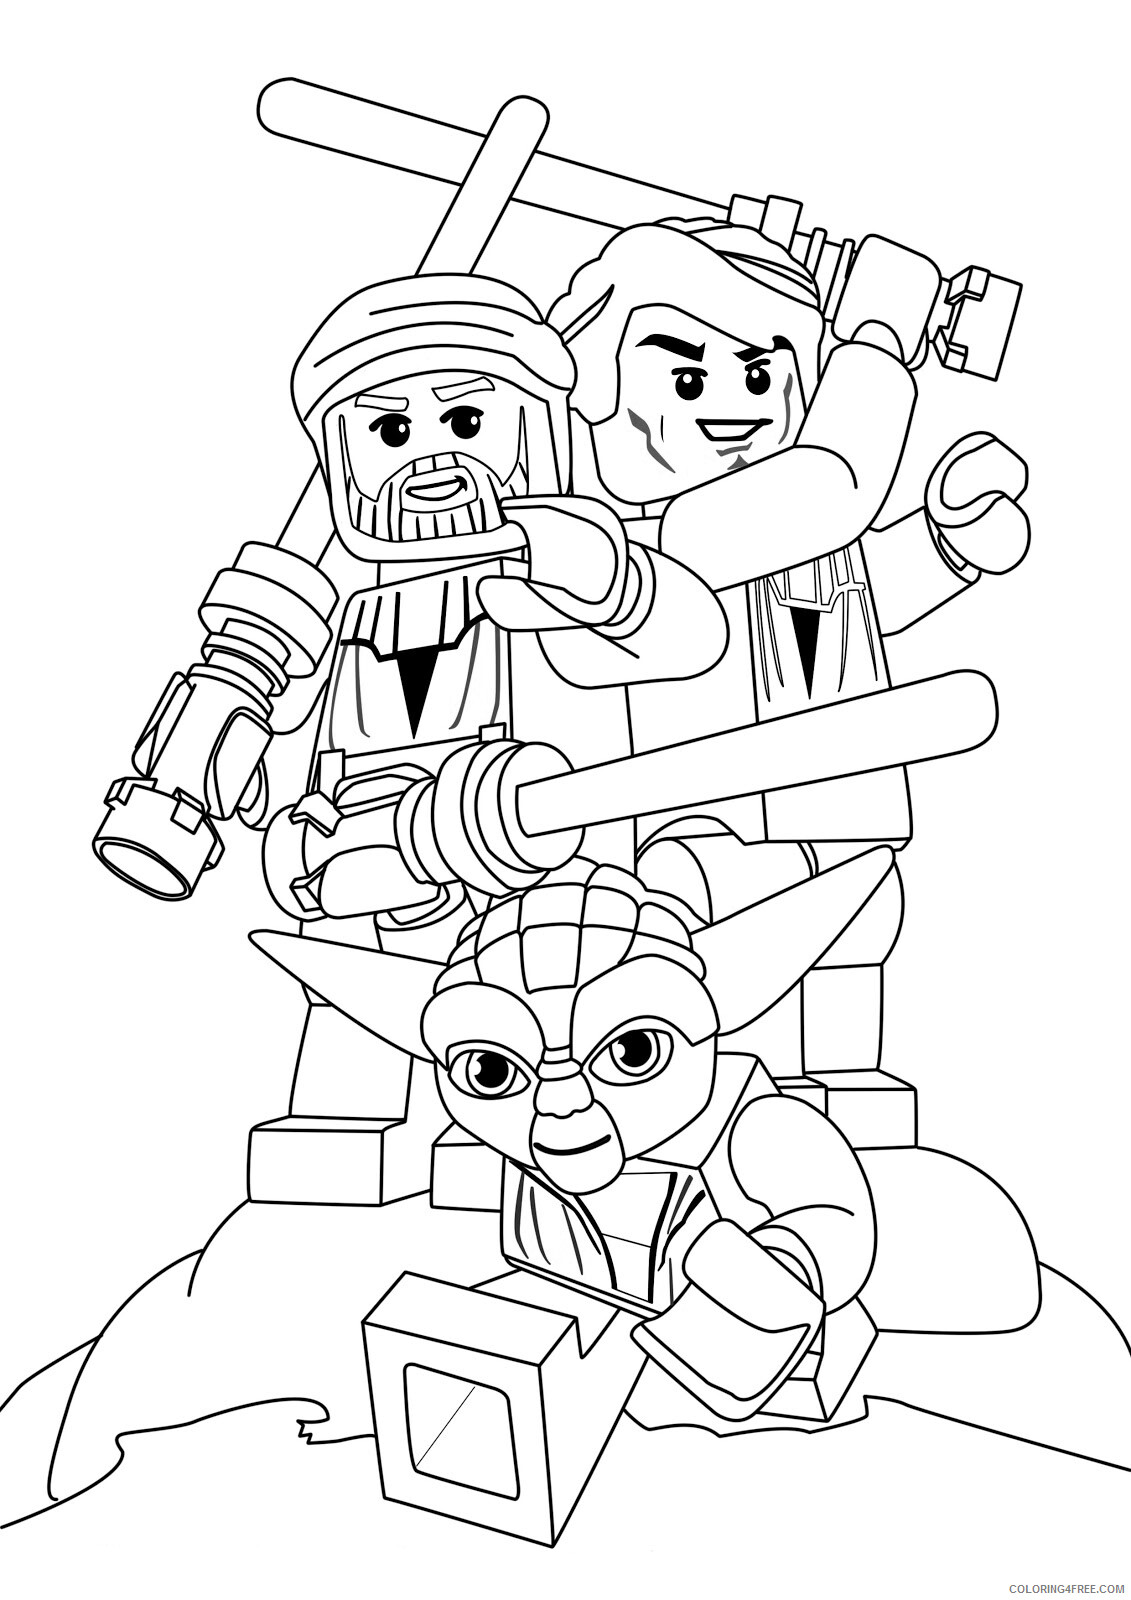 Star Wars Coloring Pages TV Film Printable Lego Star Wars Printable 2020 07818 Coloring4free